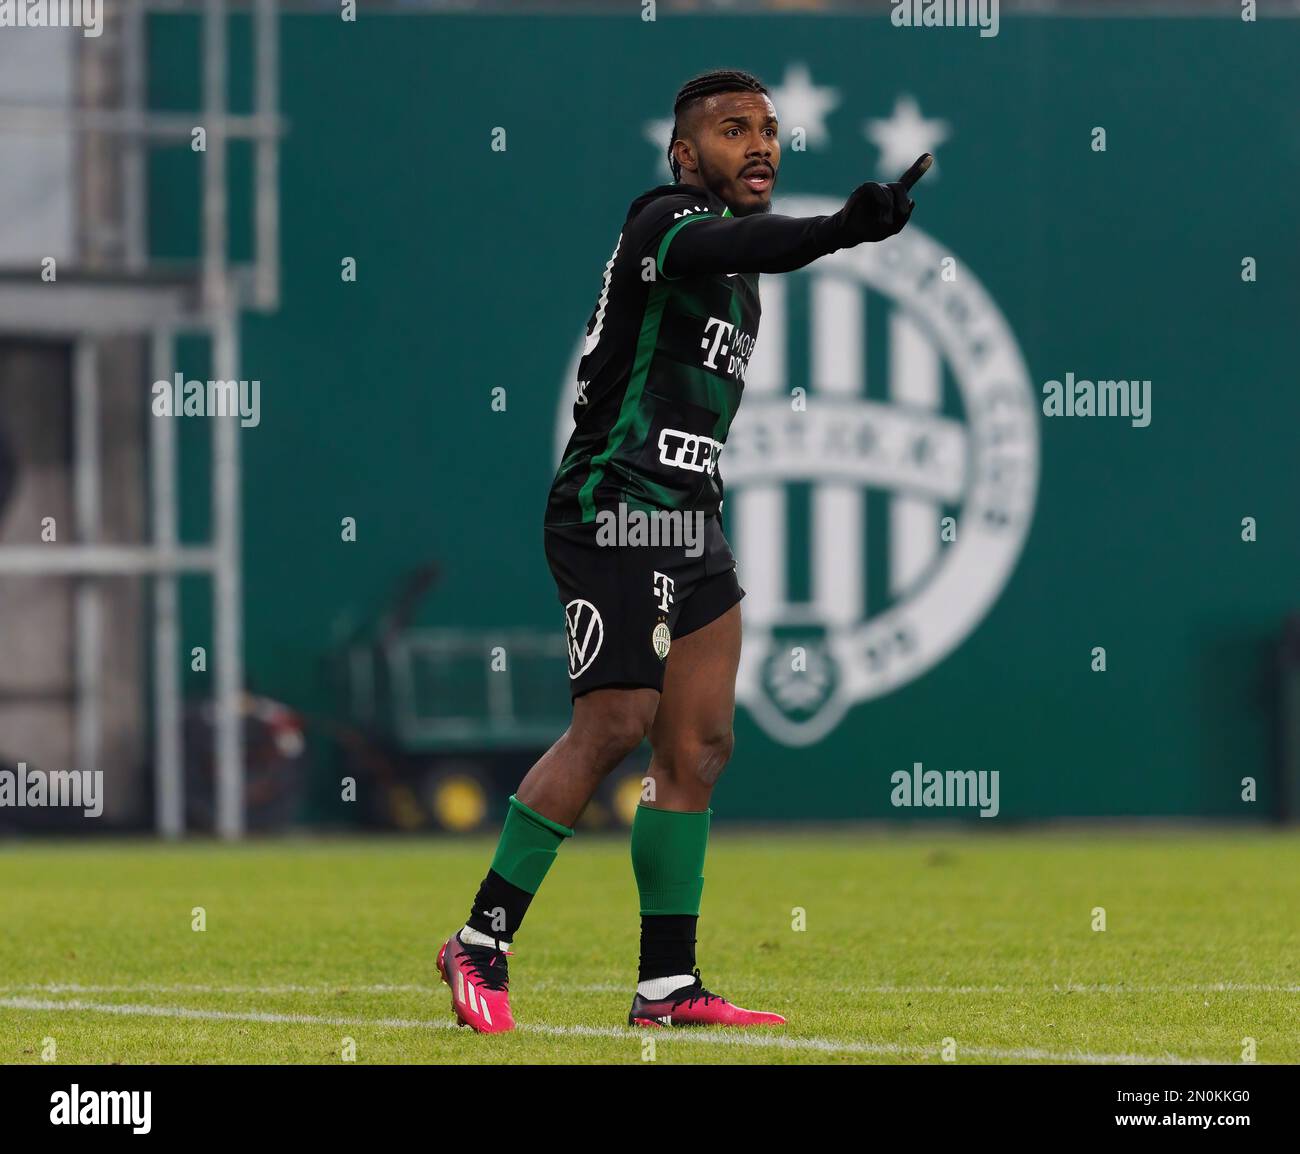 BUDAPEST, HUNGARY - FEBRUARY 5: Jose Marcos Marquinhos of Ferencvarosi TC  reacts during the Hungarian OTP Bank